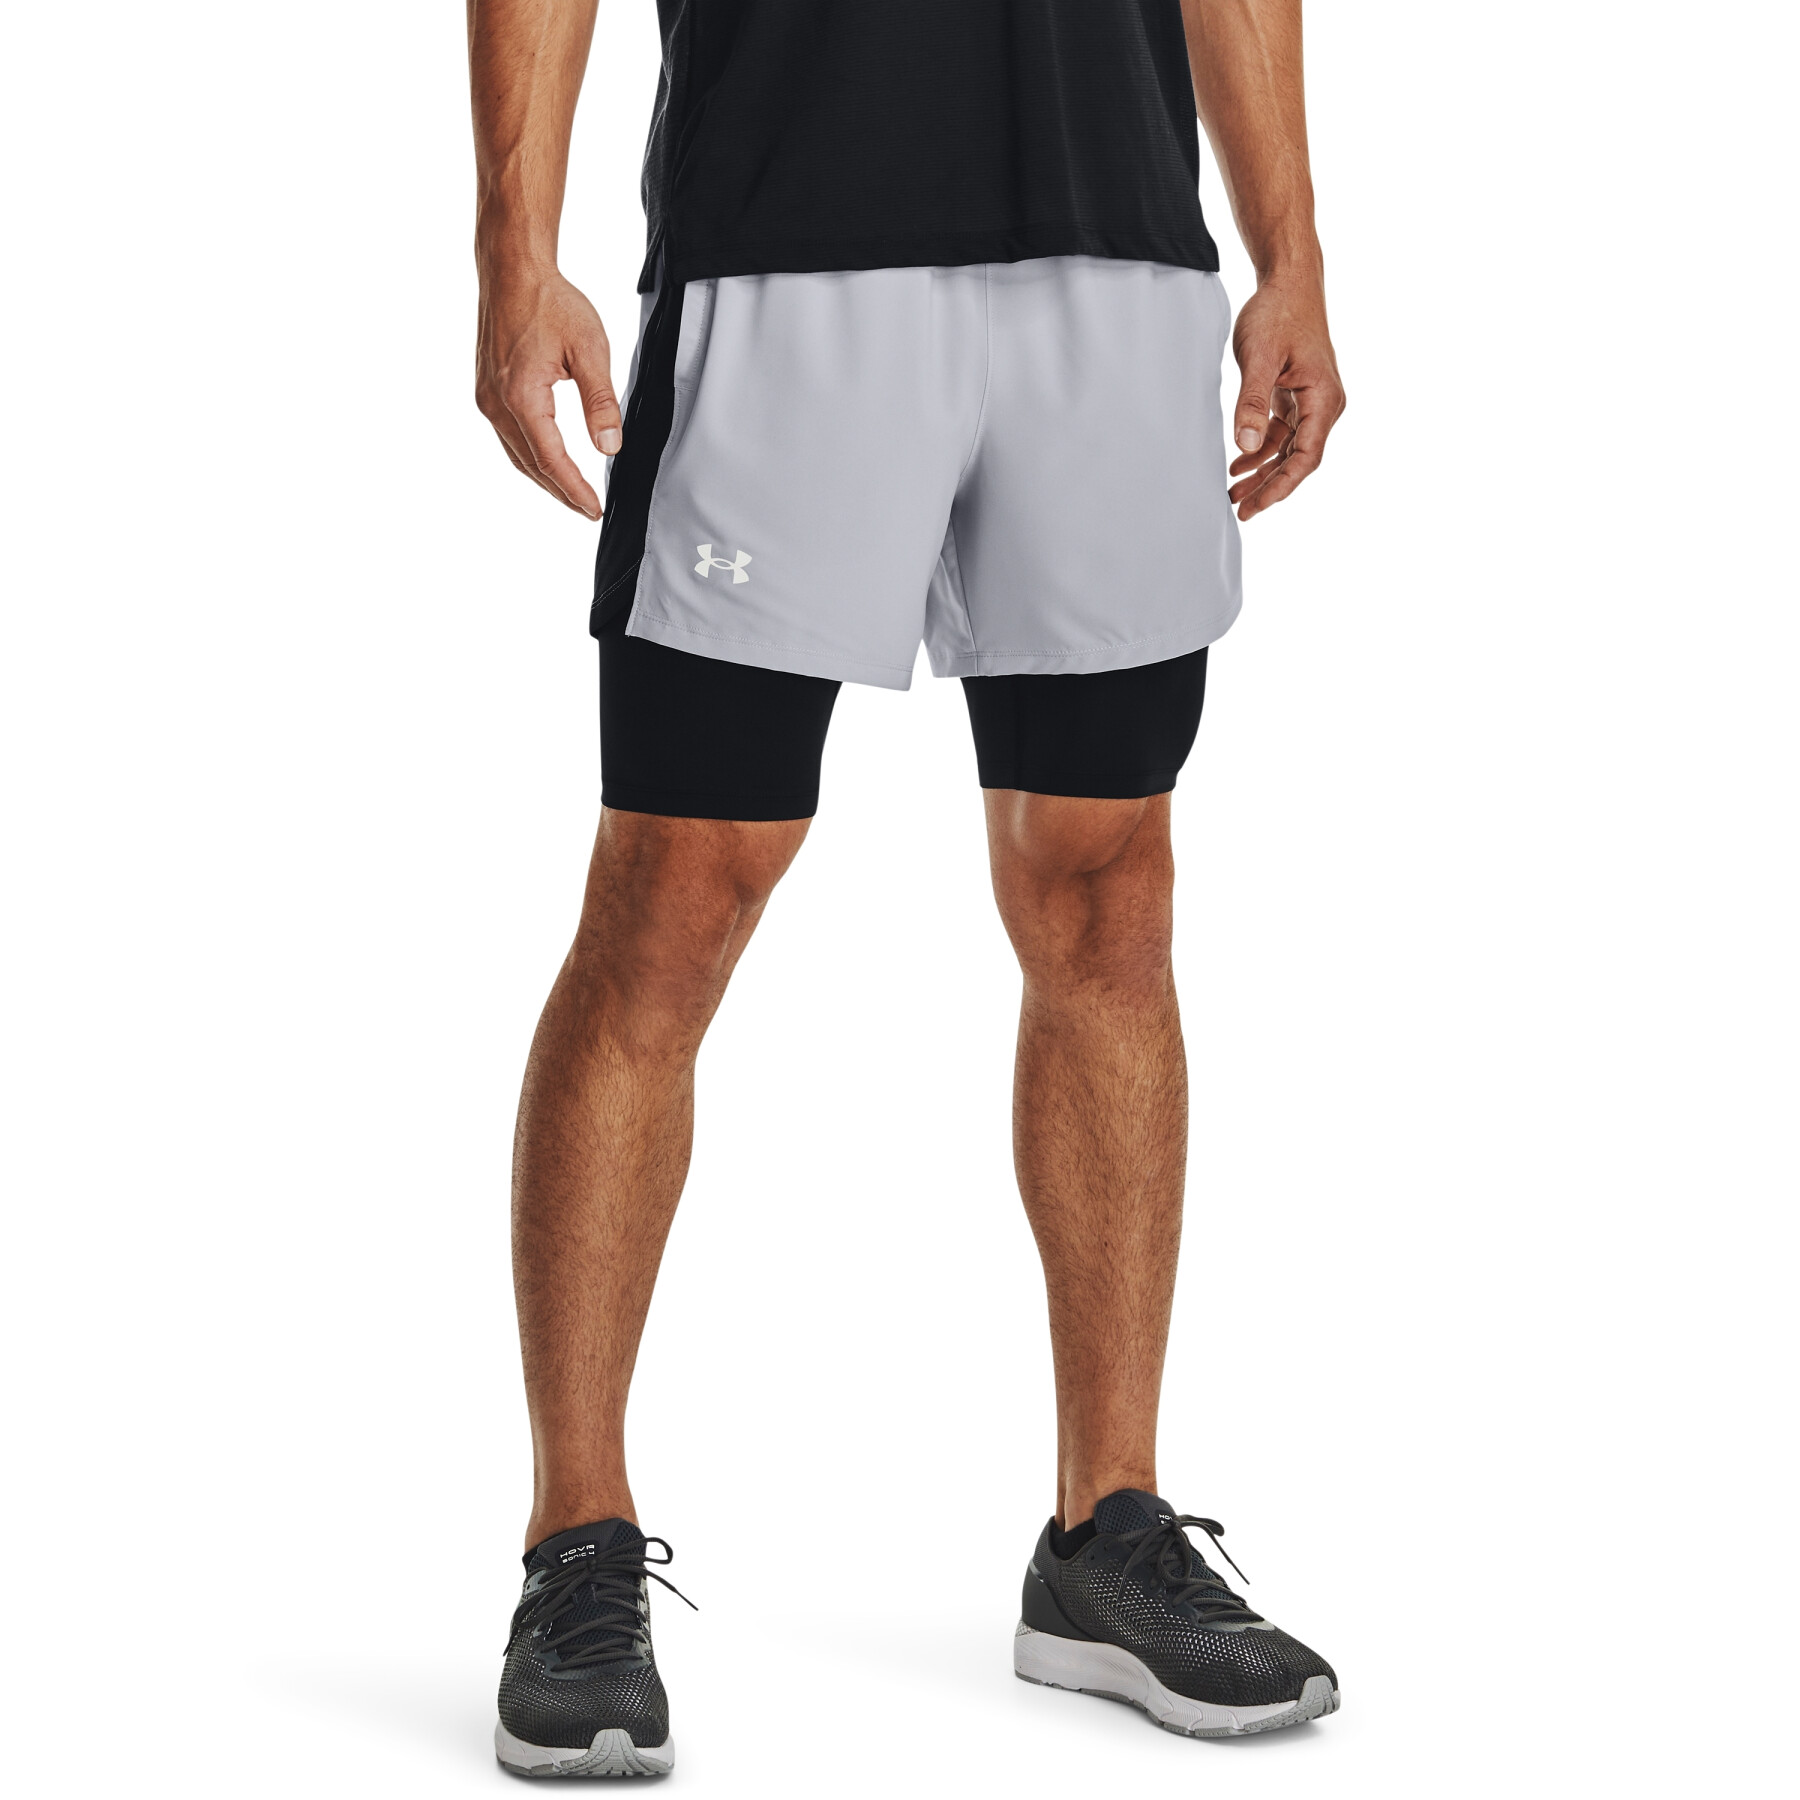 2-in-1 shorts Under Armour Launch SW